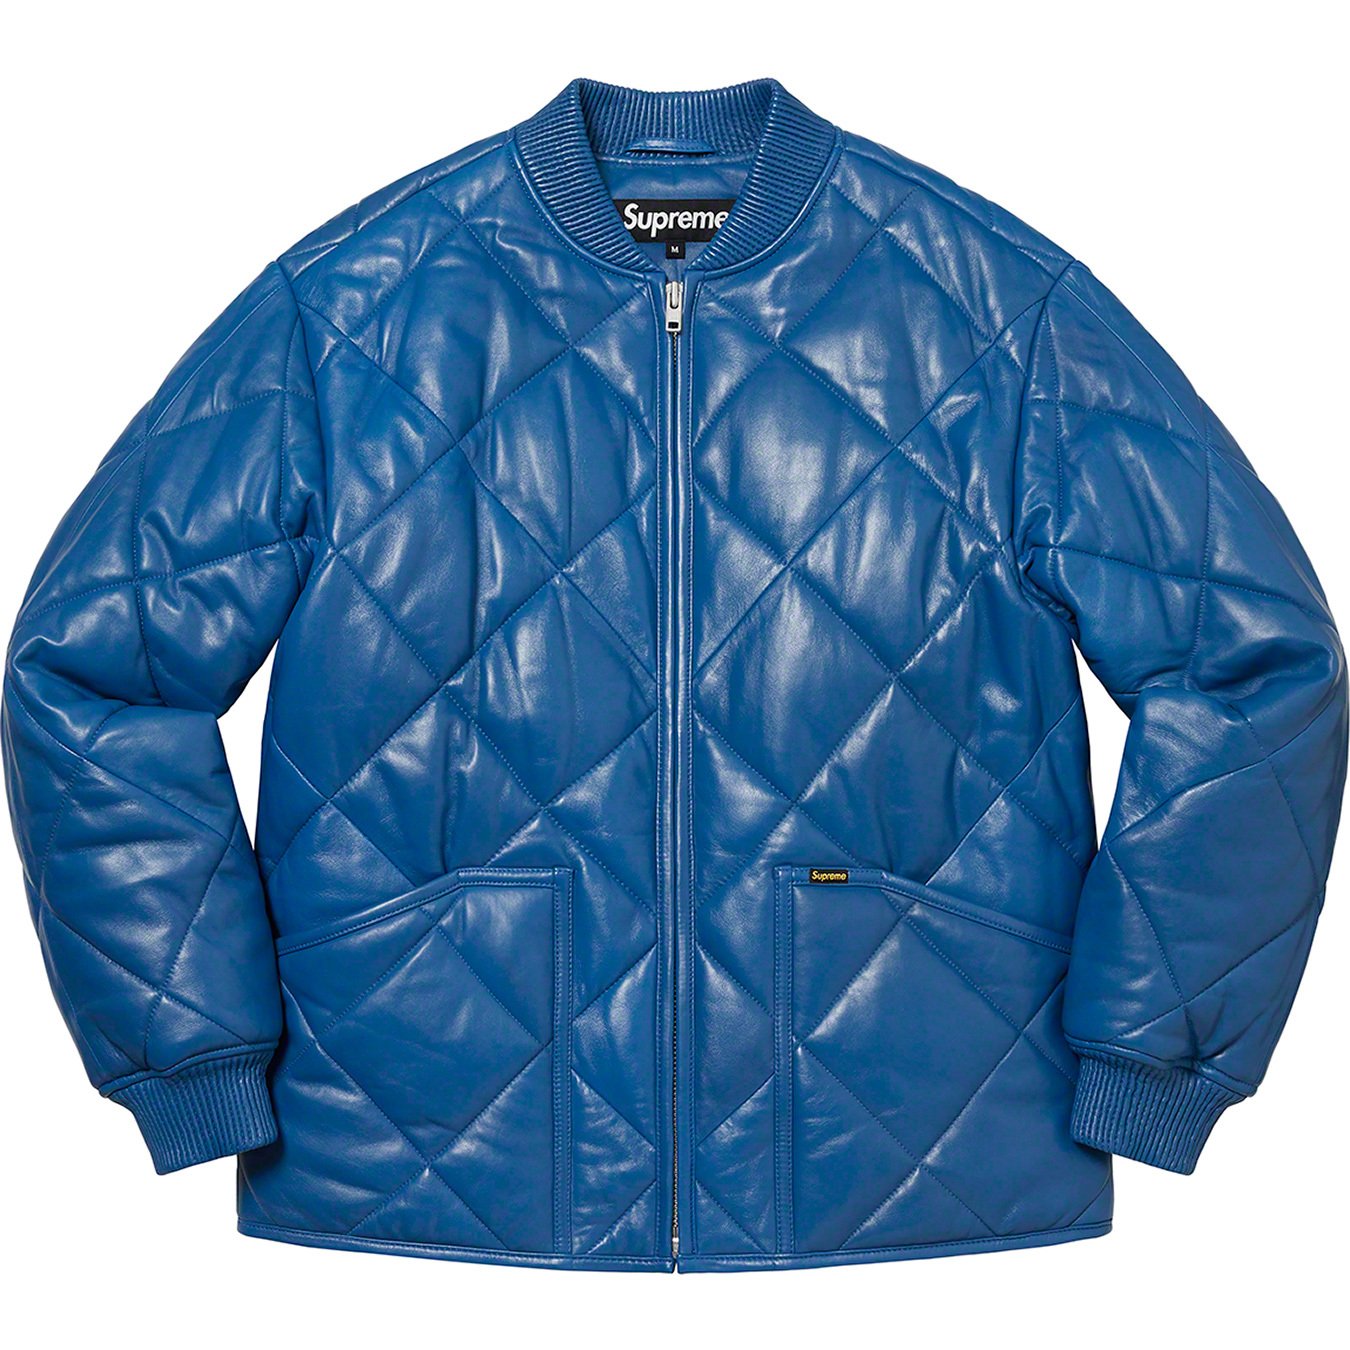 Quilted Leather Work Jacket - fall winter 2022 - Supreme